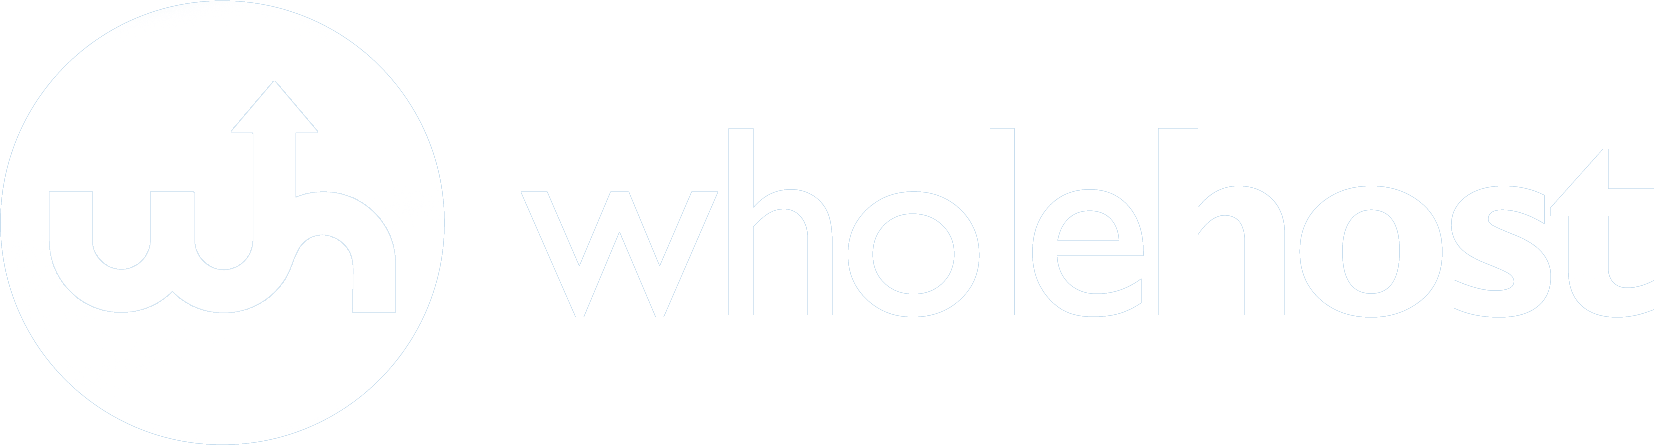 WholeHost IT Solutions